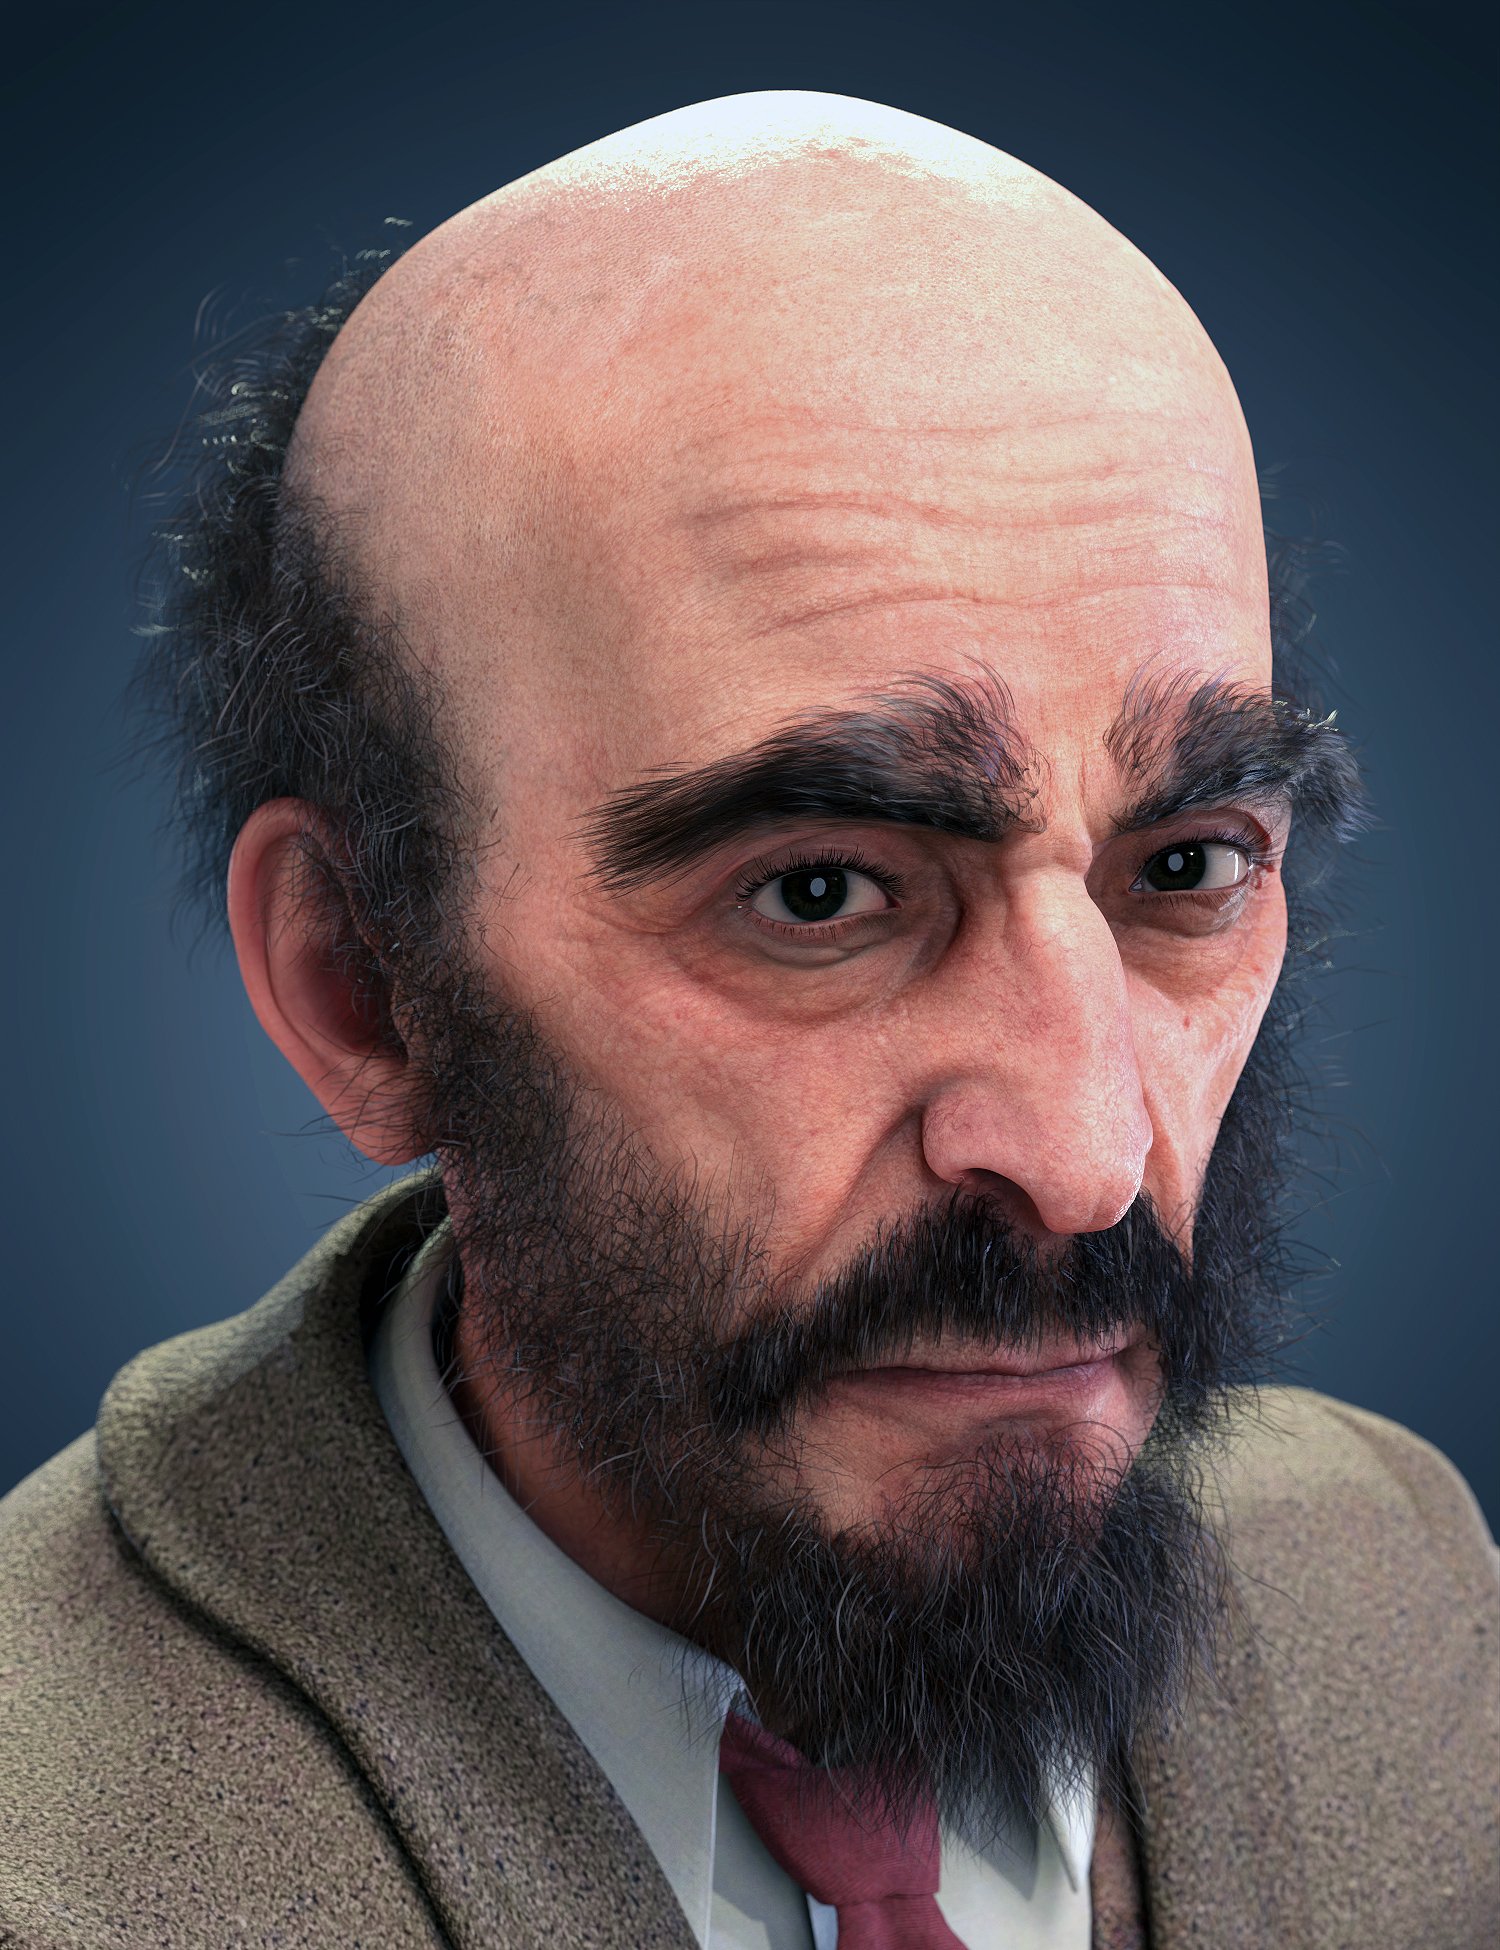 M3D Victorian Hair, Facial Hair, Hats, and Aging for Genesis 8.1 Male by: Matari3D, 3D Models by Daz 3D